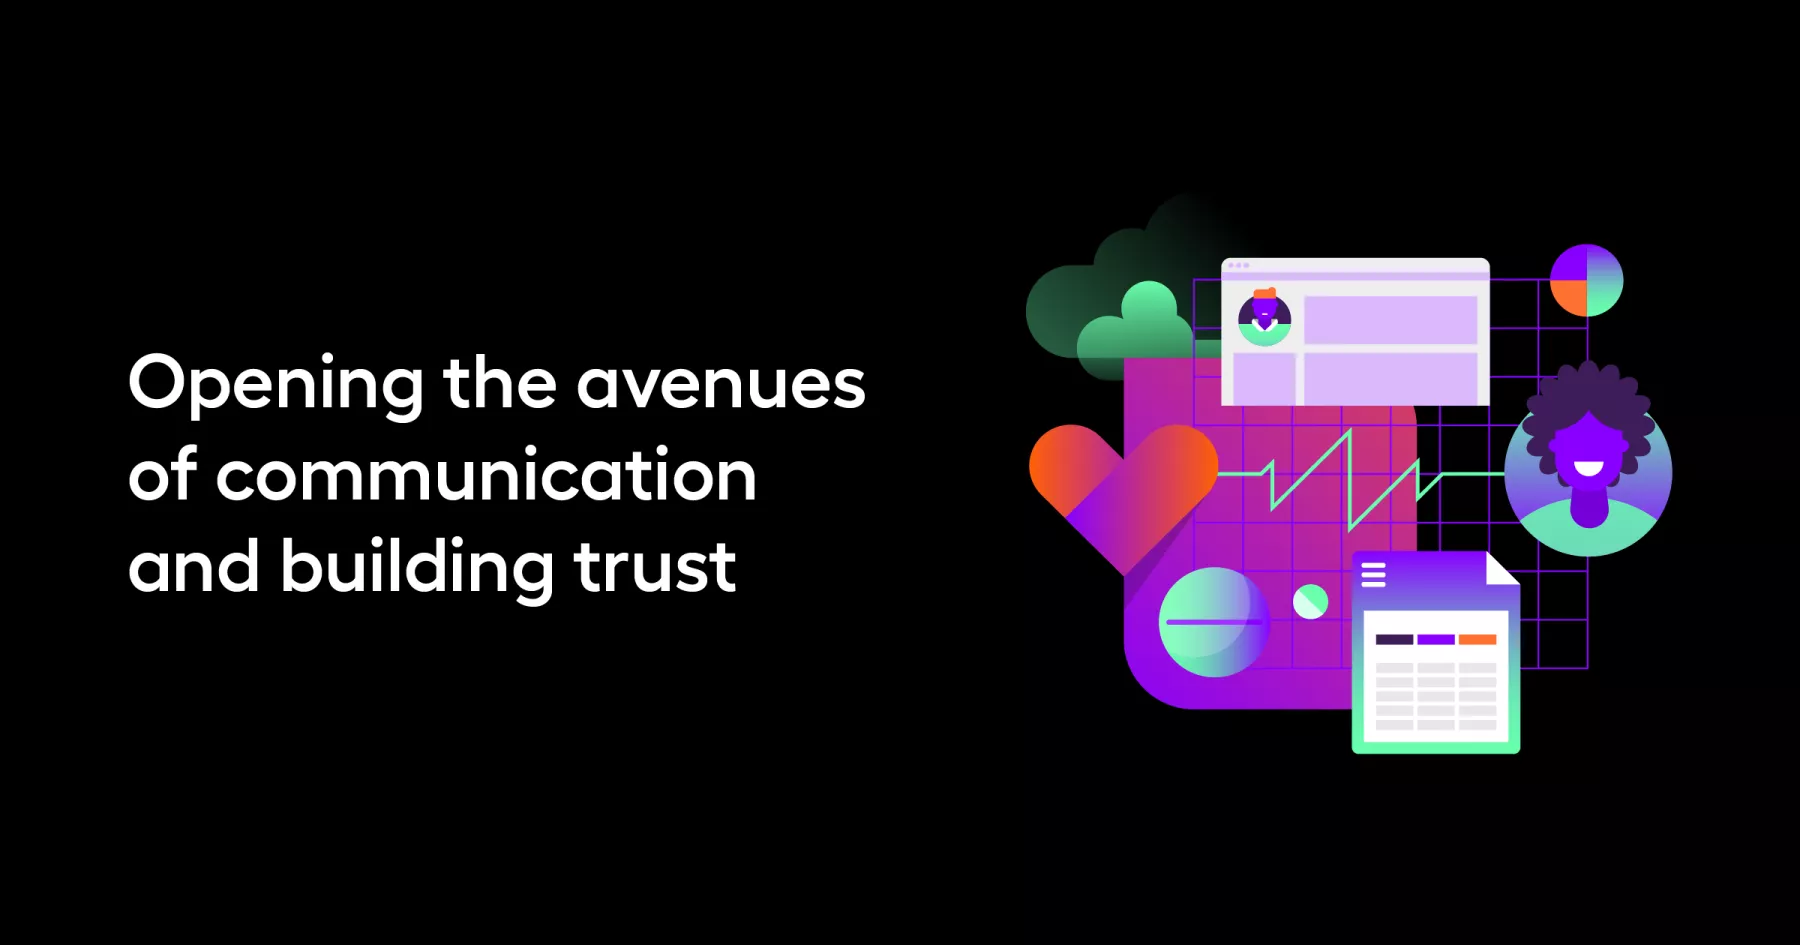 Opening the avenues of communication and building trust